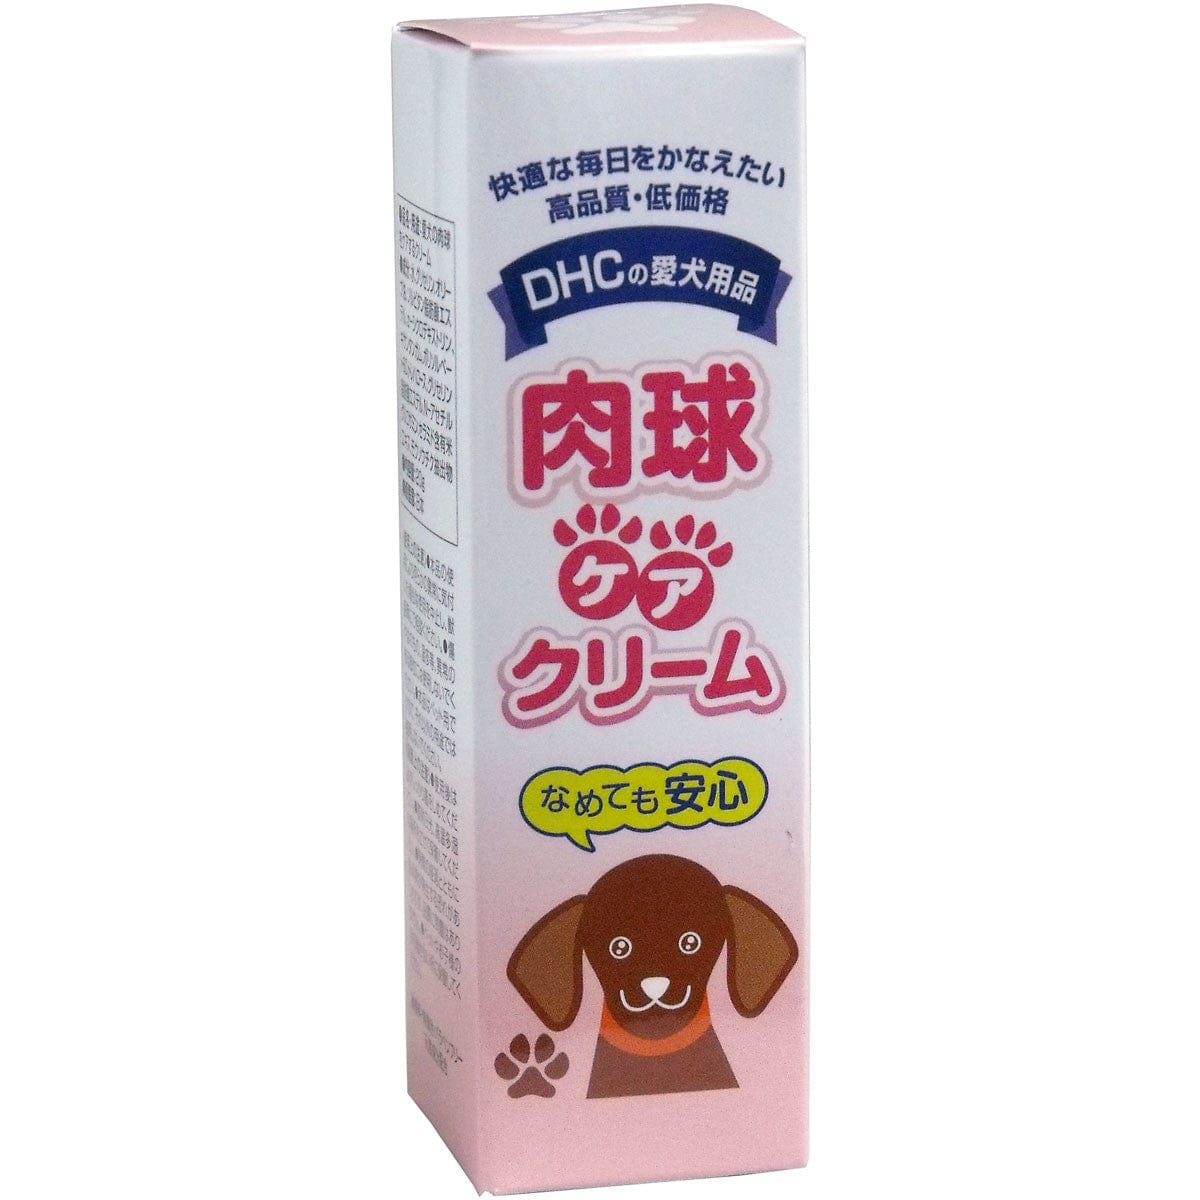 DHC - Paw Care Cream for Pet Dogs 20g    Pet Paw Cream